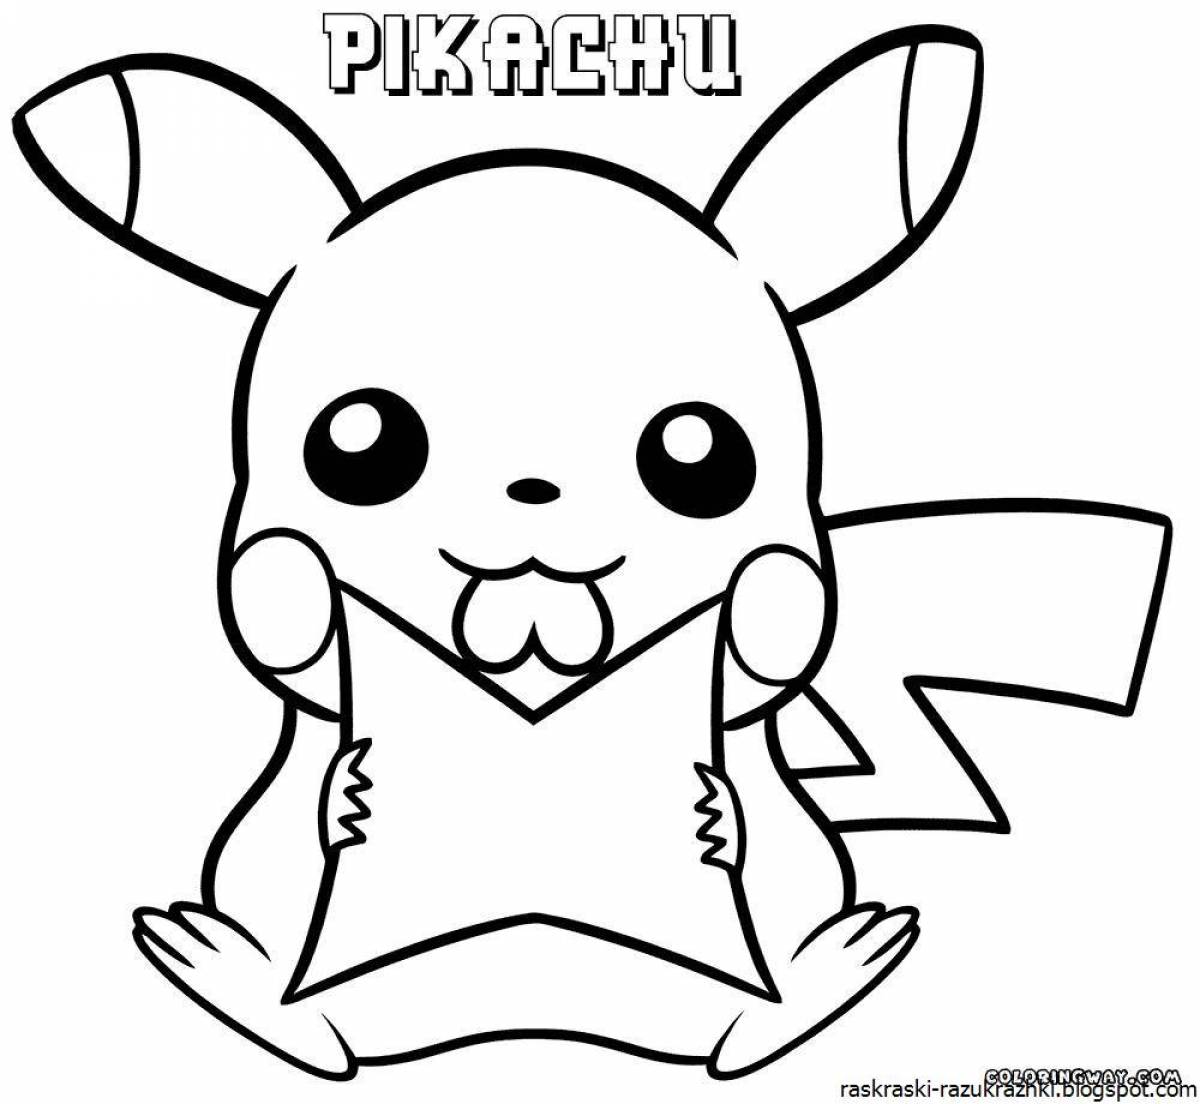 Funny new year pikachu